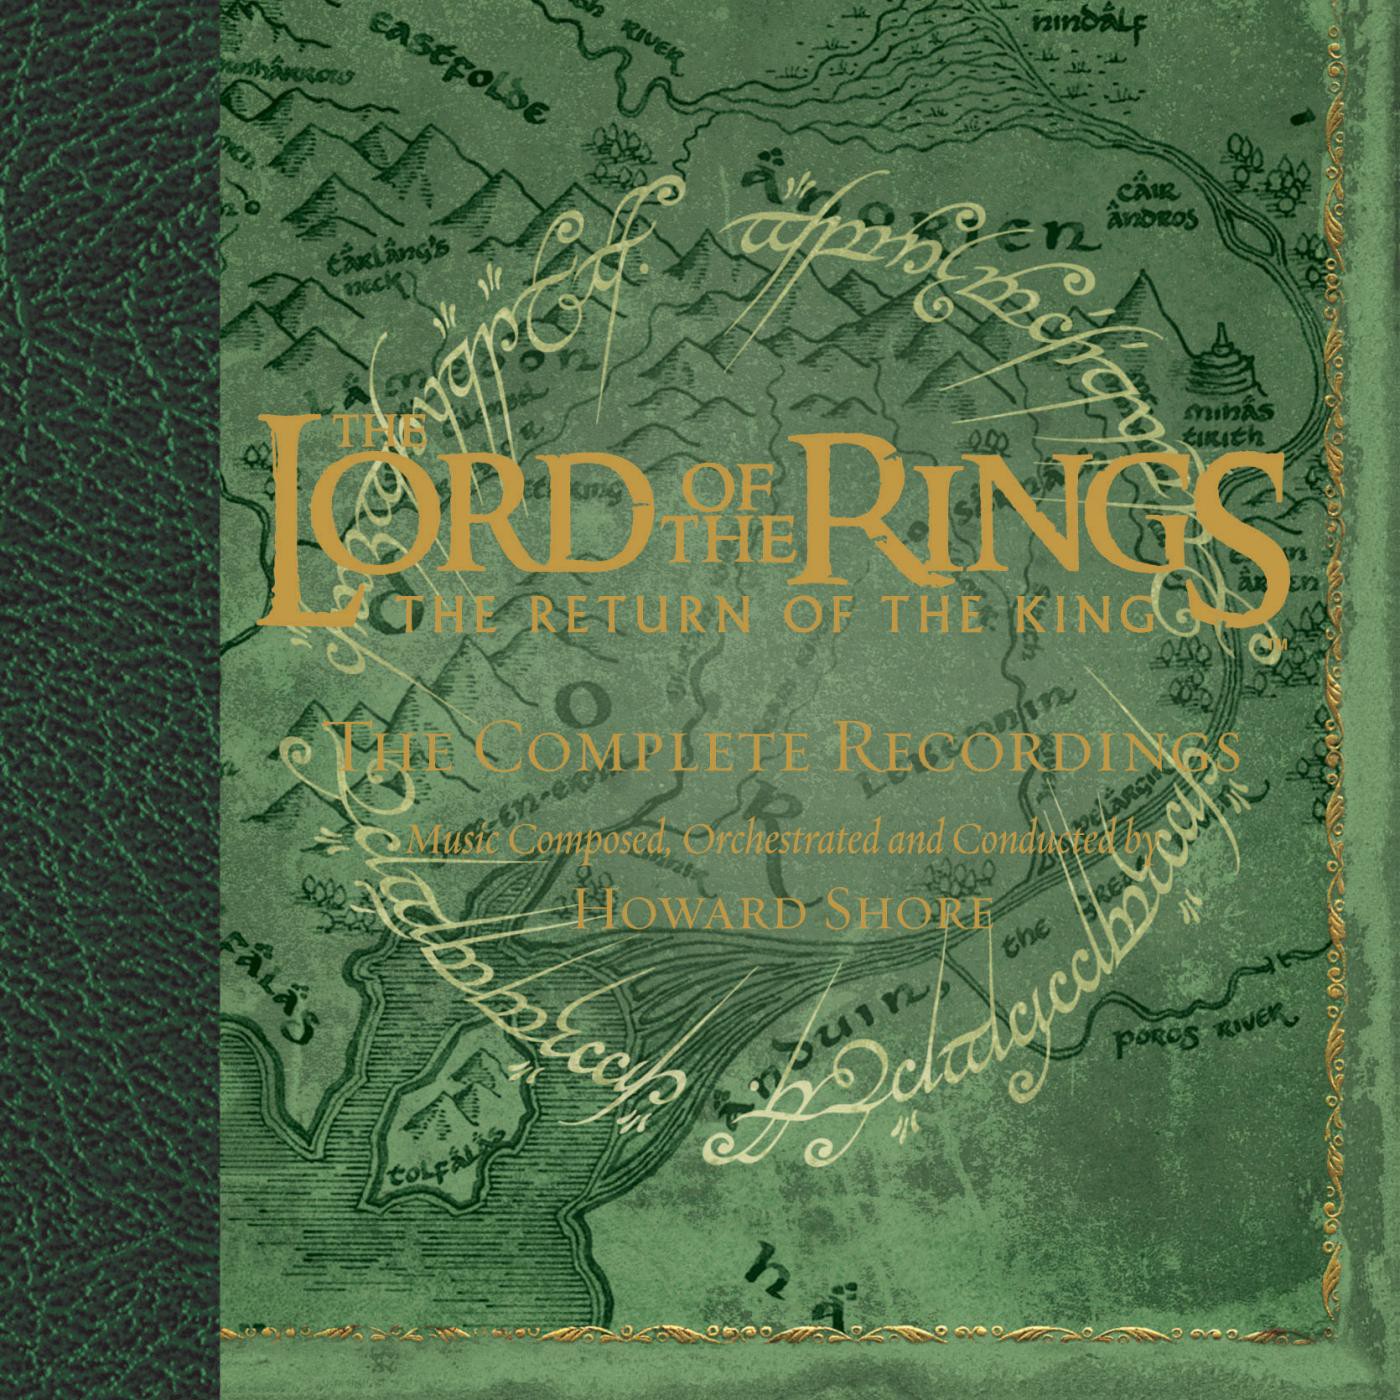 complete lord of the rings audiobook download